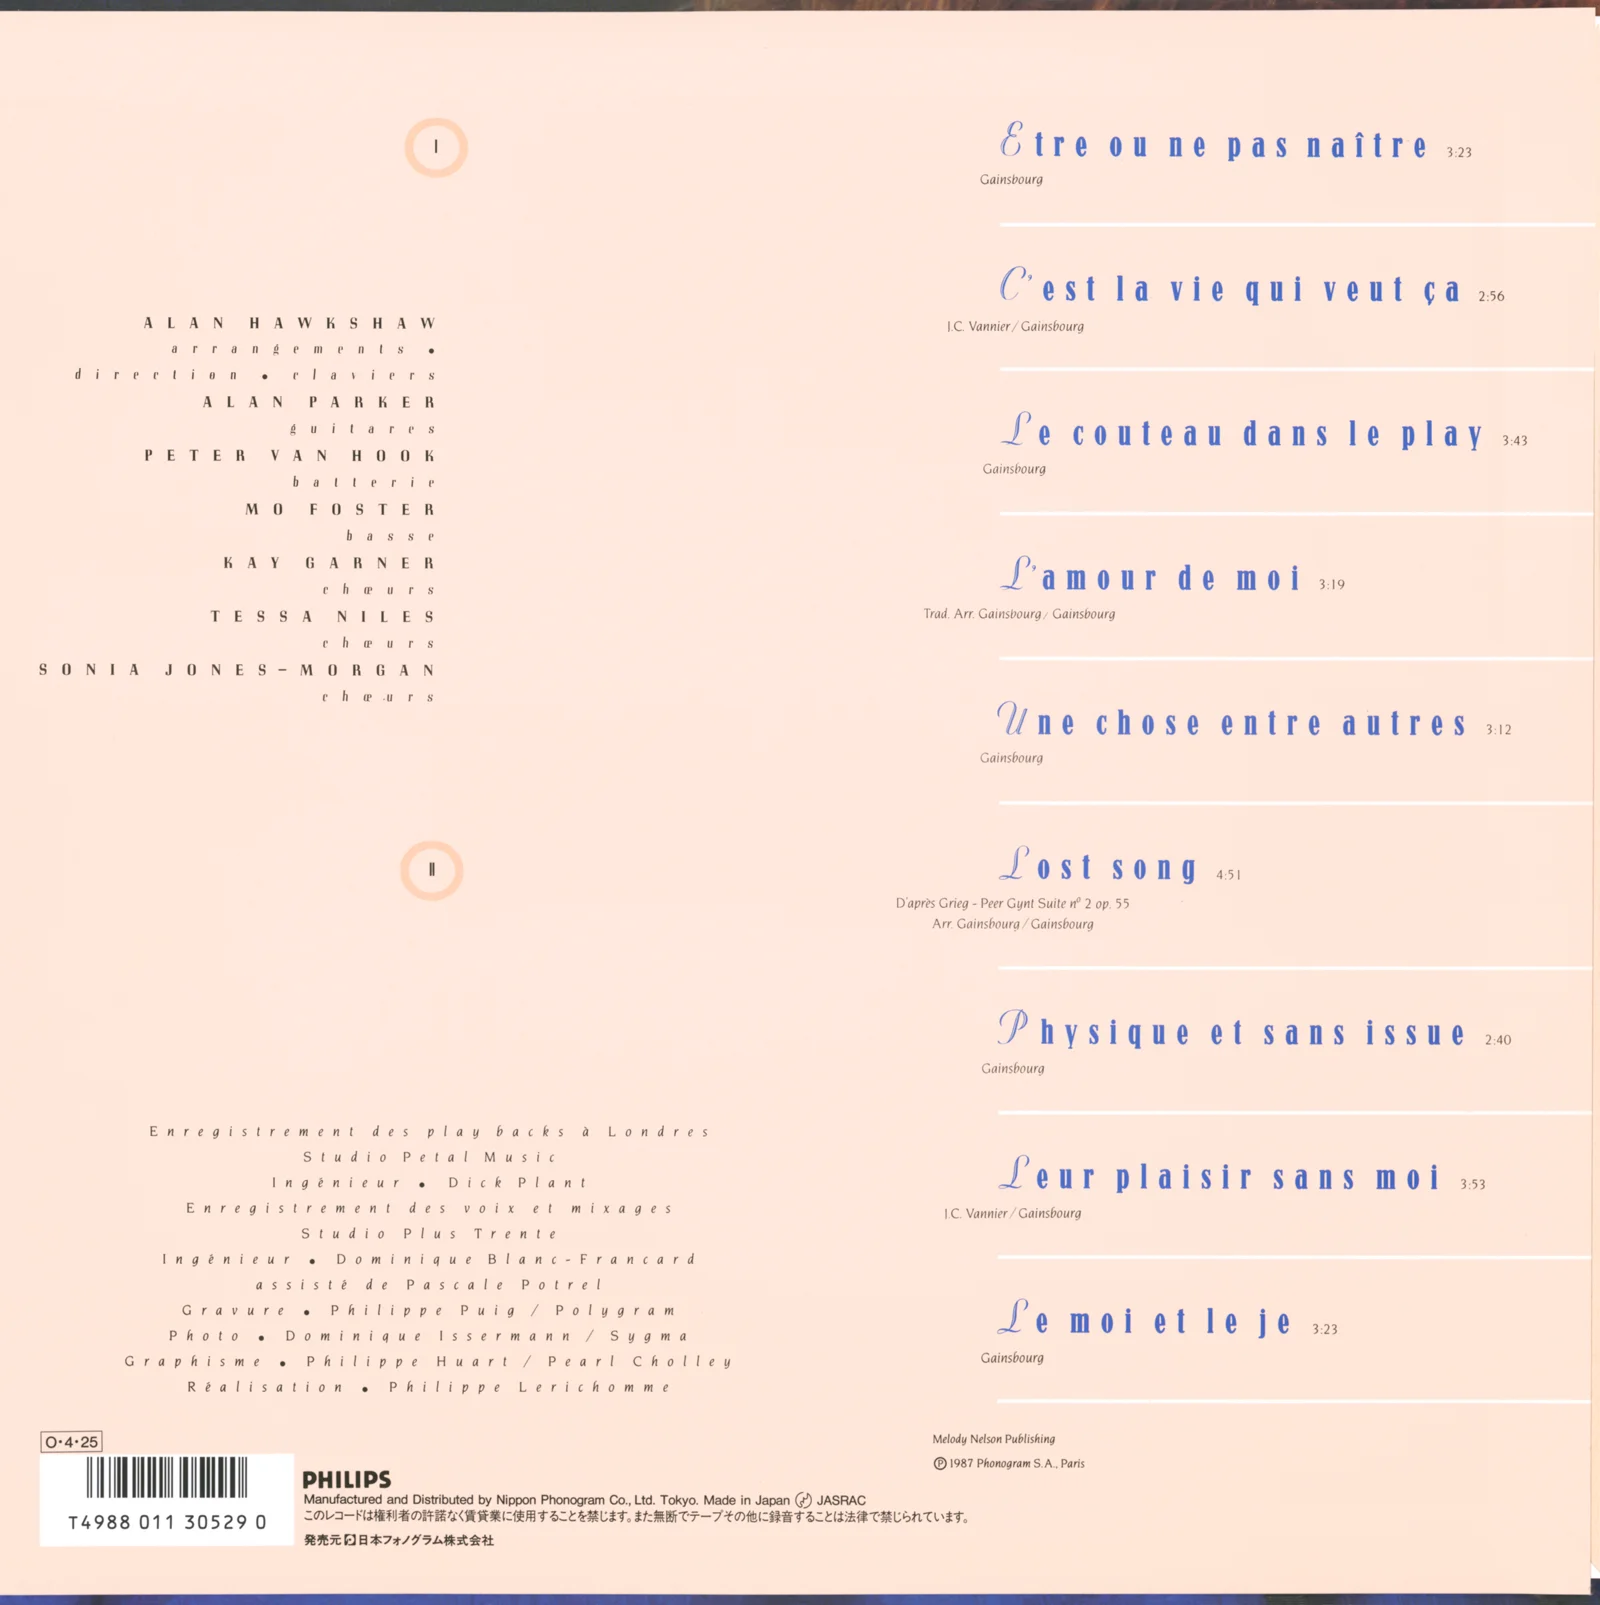 Lost Song back cover